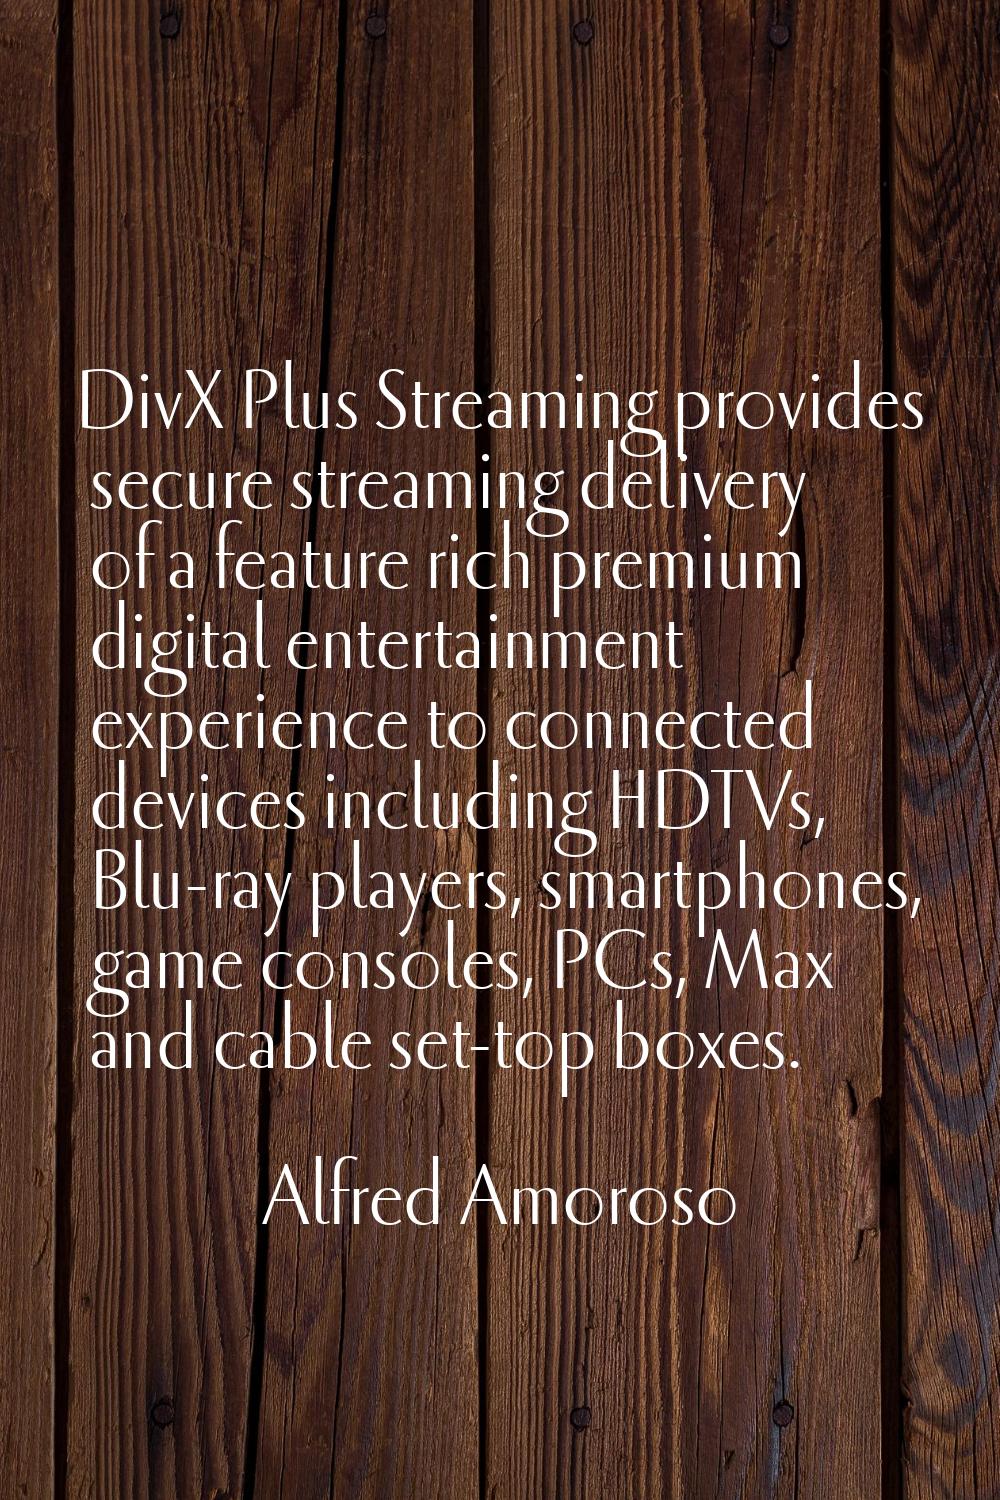 DivX Plus Streaming provides secure streaming delivery of a feature rich premium digital entertainm